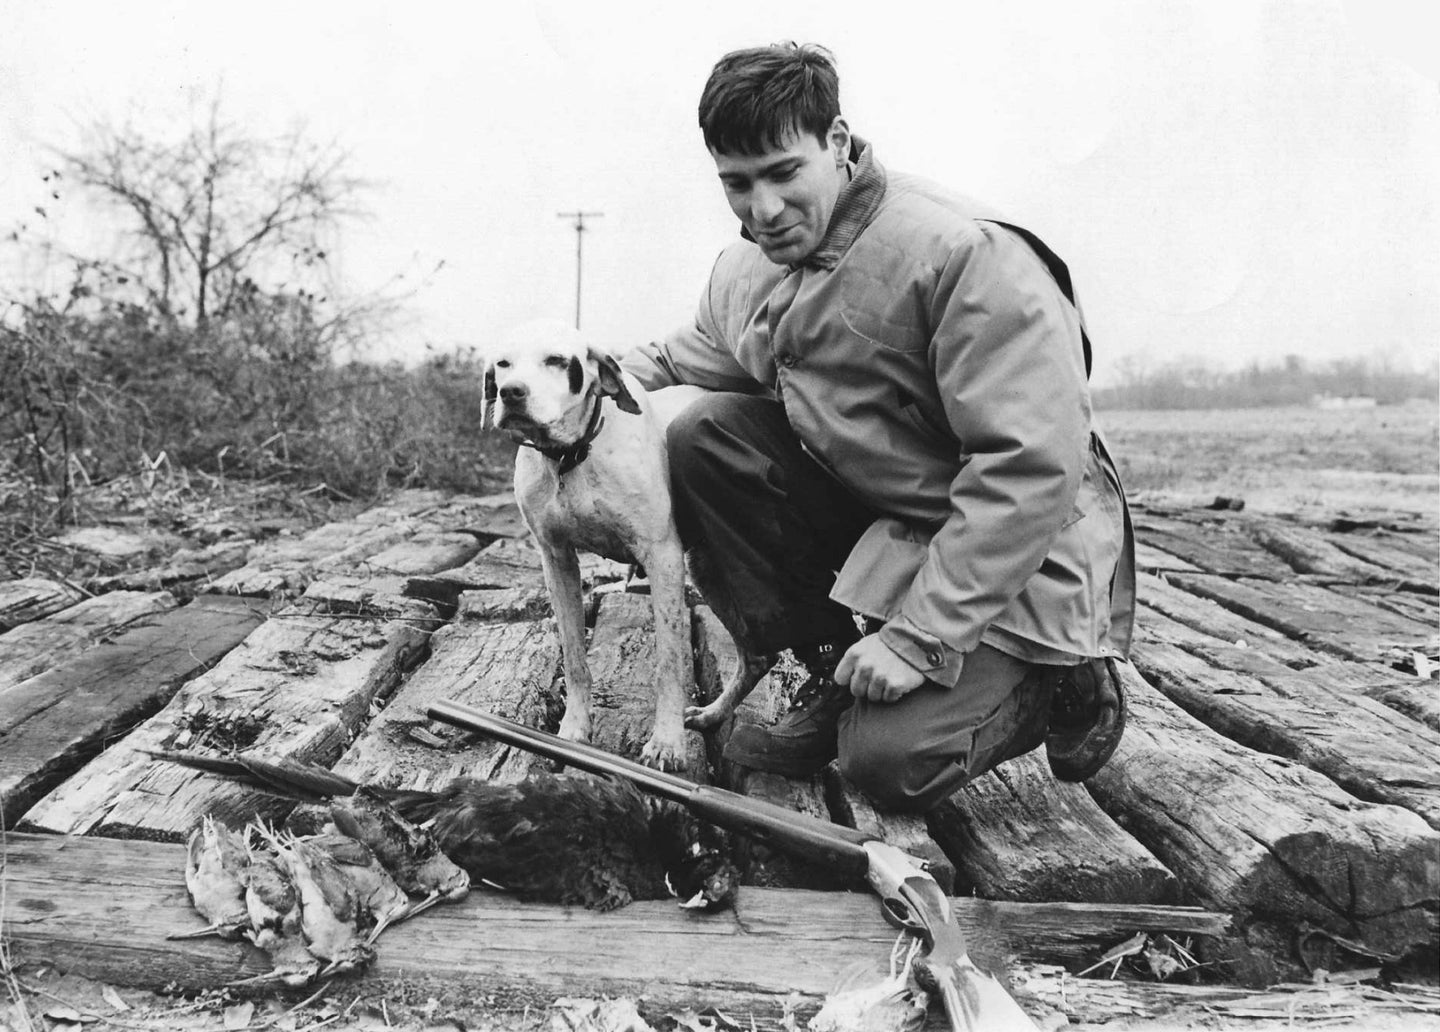 david e. petzal with a pointer hunting dog